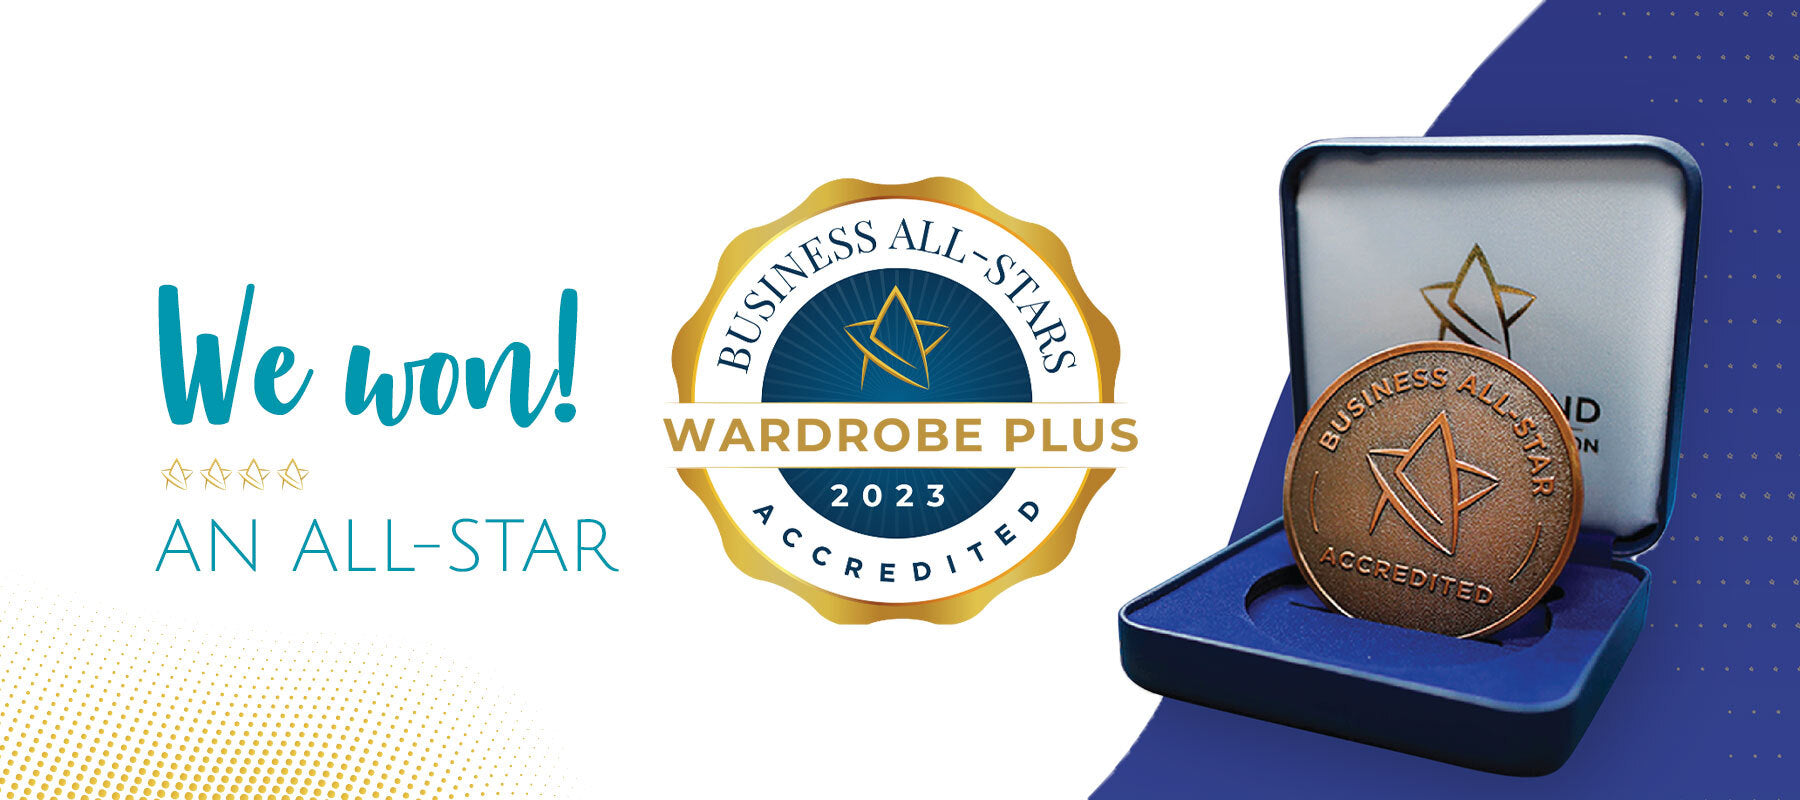 Wardrobe Plus Earns National Recognition & All-Star Accreditation